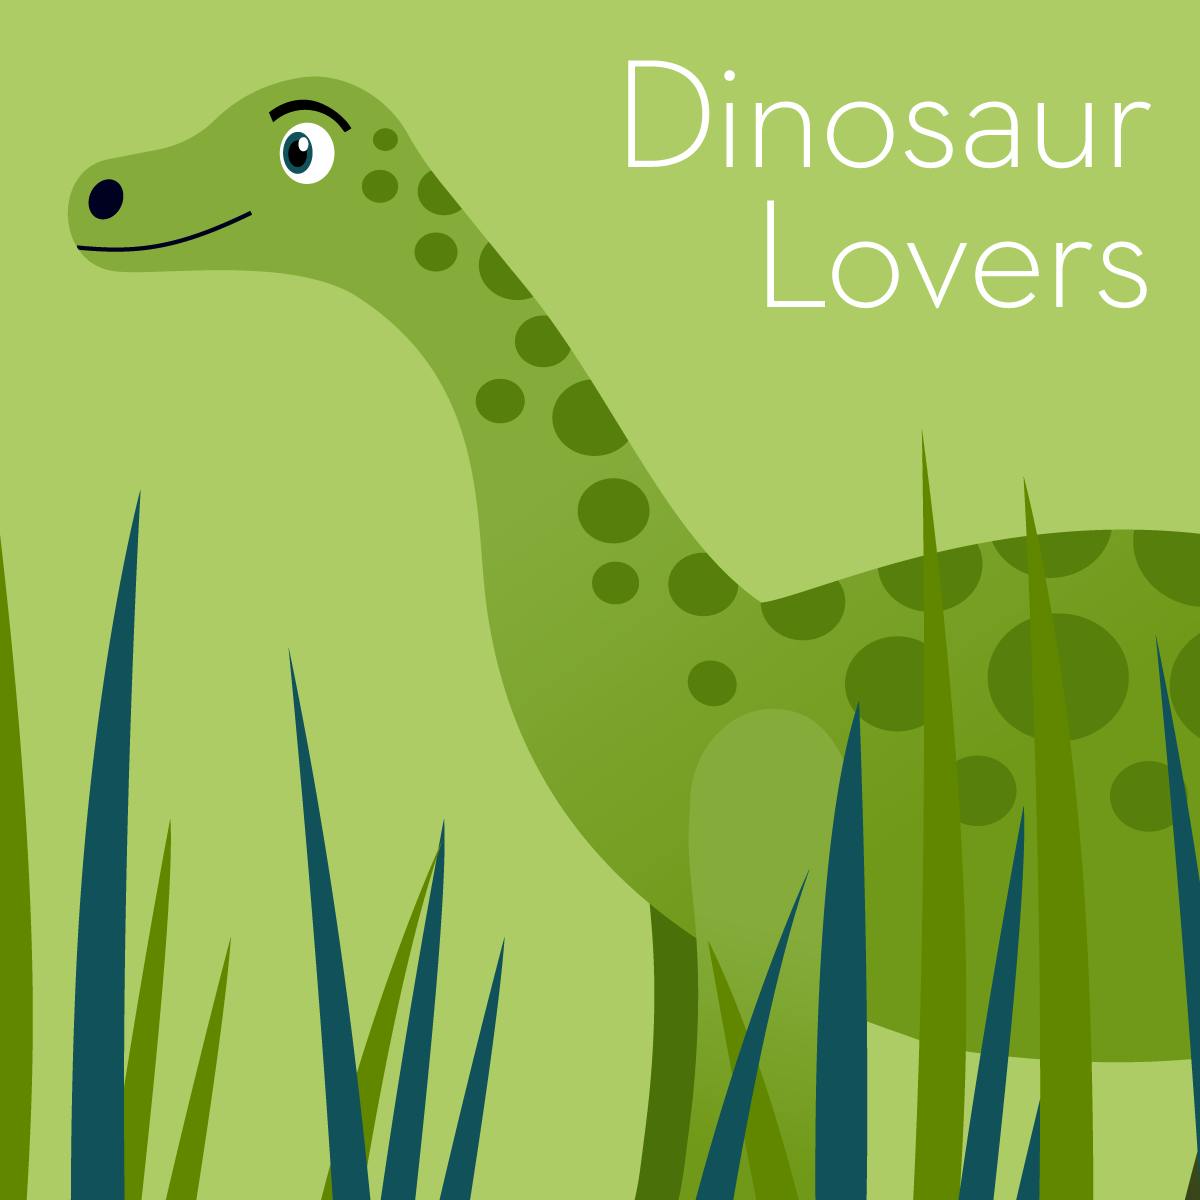 Illustration of a gift guide for dinosaur toys, featuring a green dinosaur in long grass.